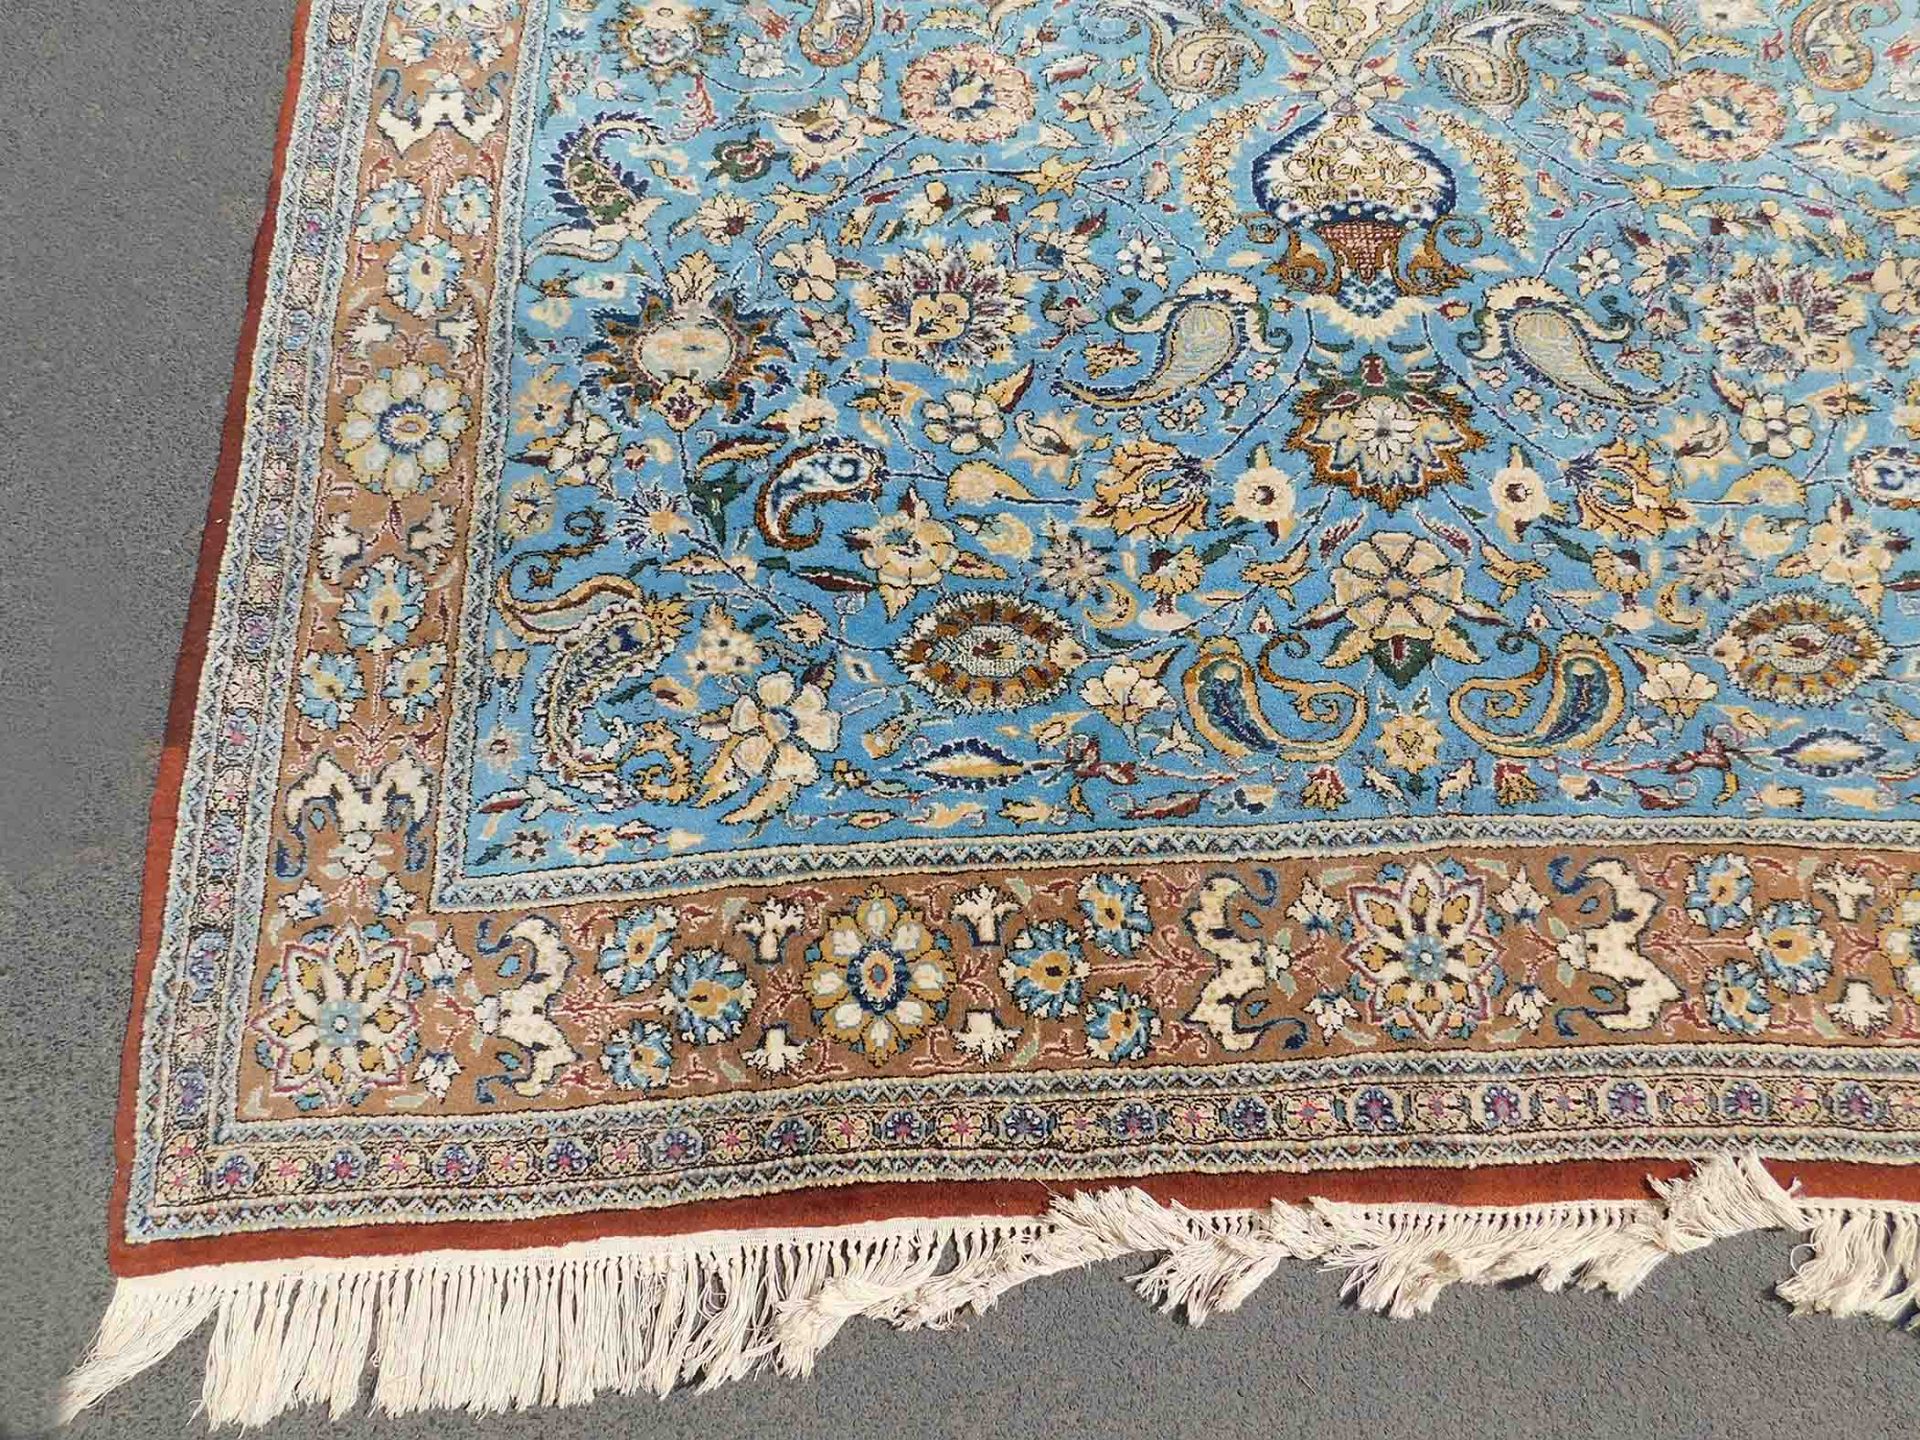 Ghum Persian rug. Iran. Very fine weave. Old, mid 20th century.333 cm x 211 cm. Knotted by hand. - Image 2 of 8